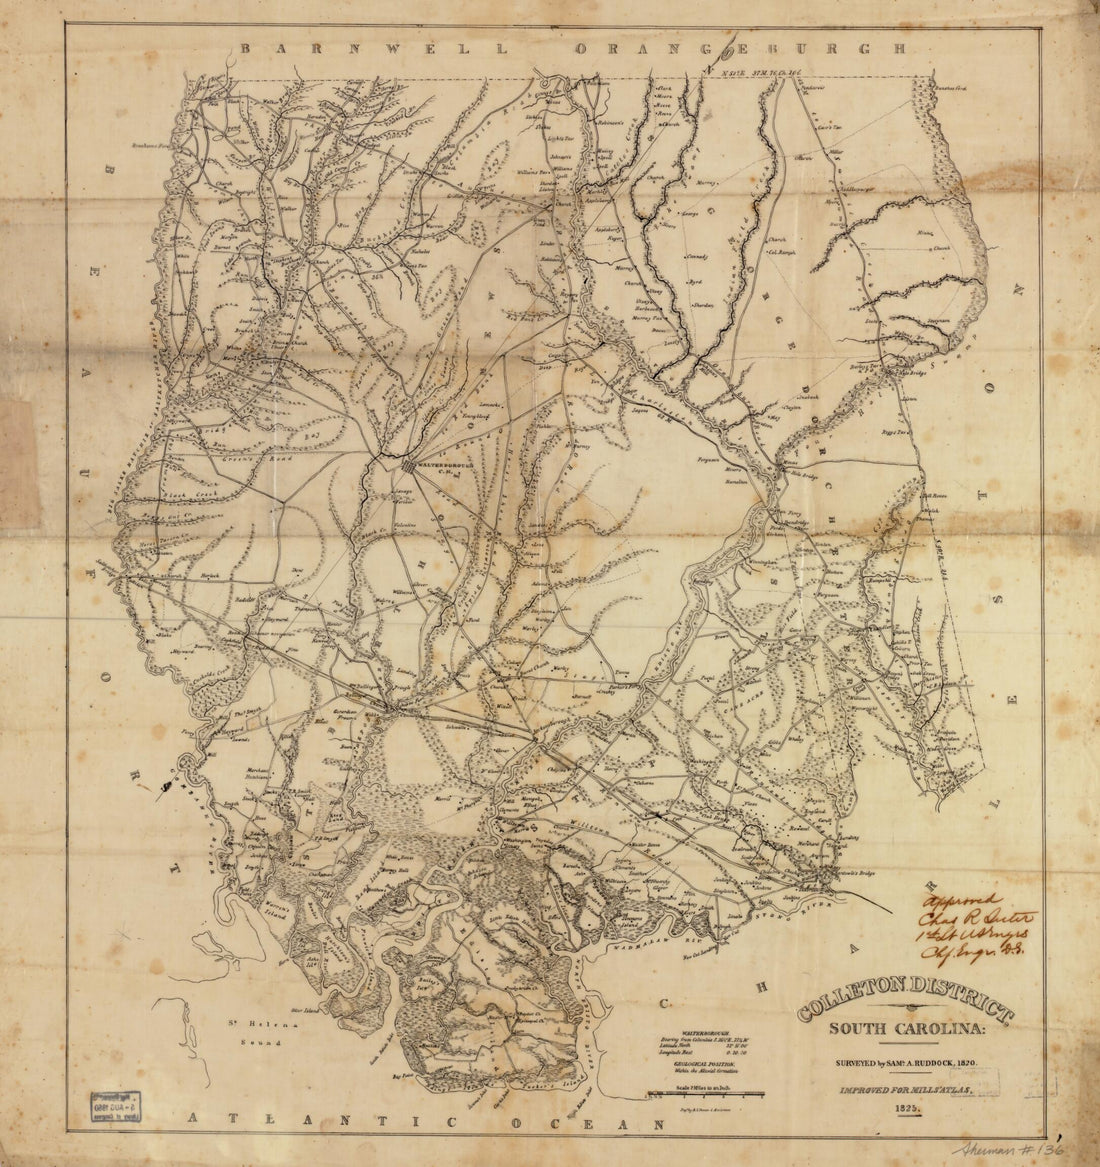 This old map of Colleton District, South Carolina from 1825 was created by Robert Mills in 1825